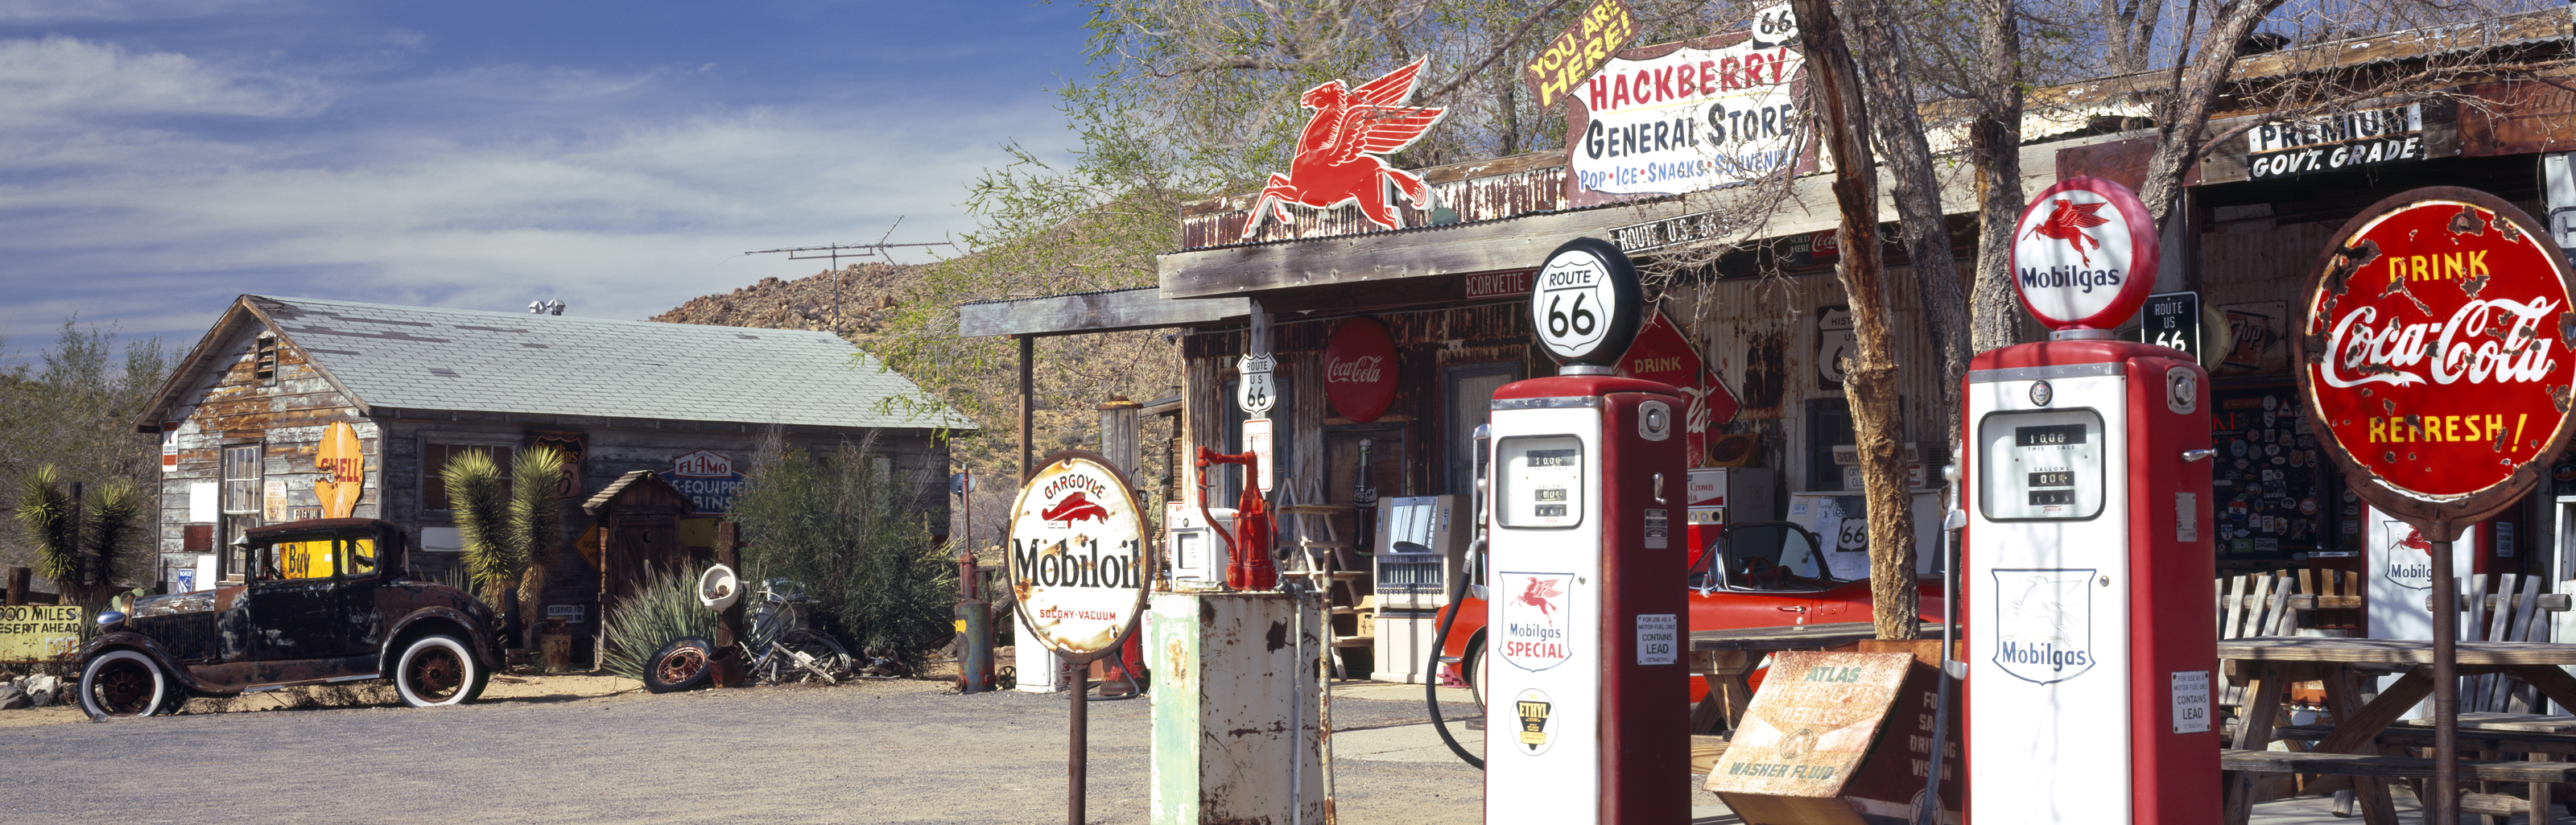 https://muralsyourway.vtexassets.com/arquivos/ids/233074/Vintage-Gas-Station-On-Route-66-Wall-Mural.jpg?v=638164440697370000